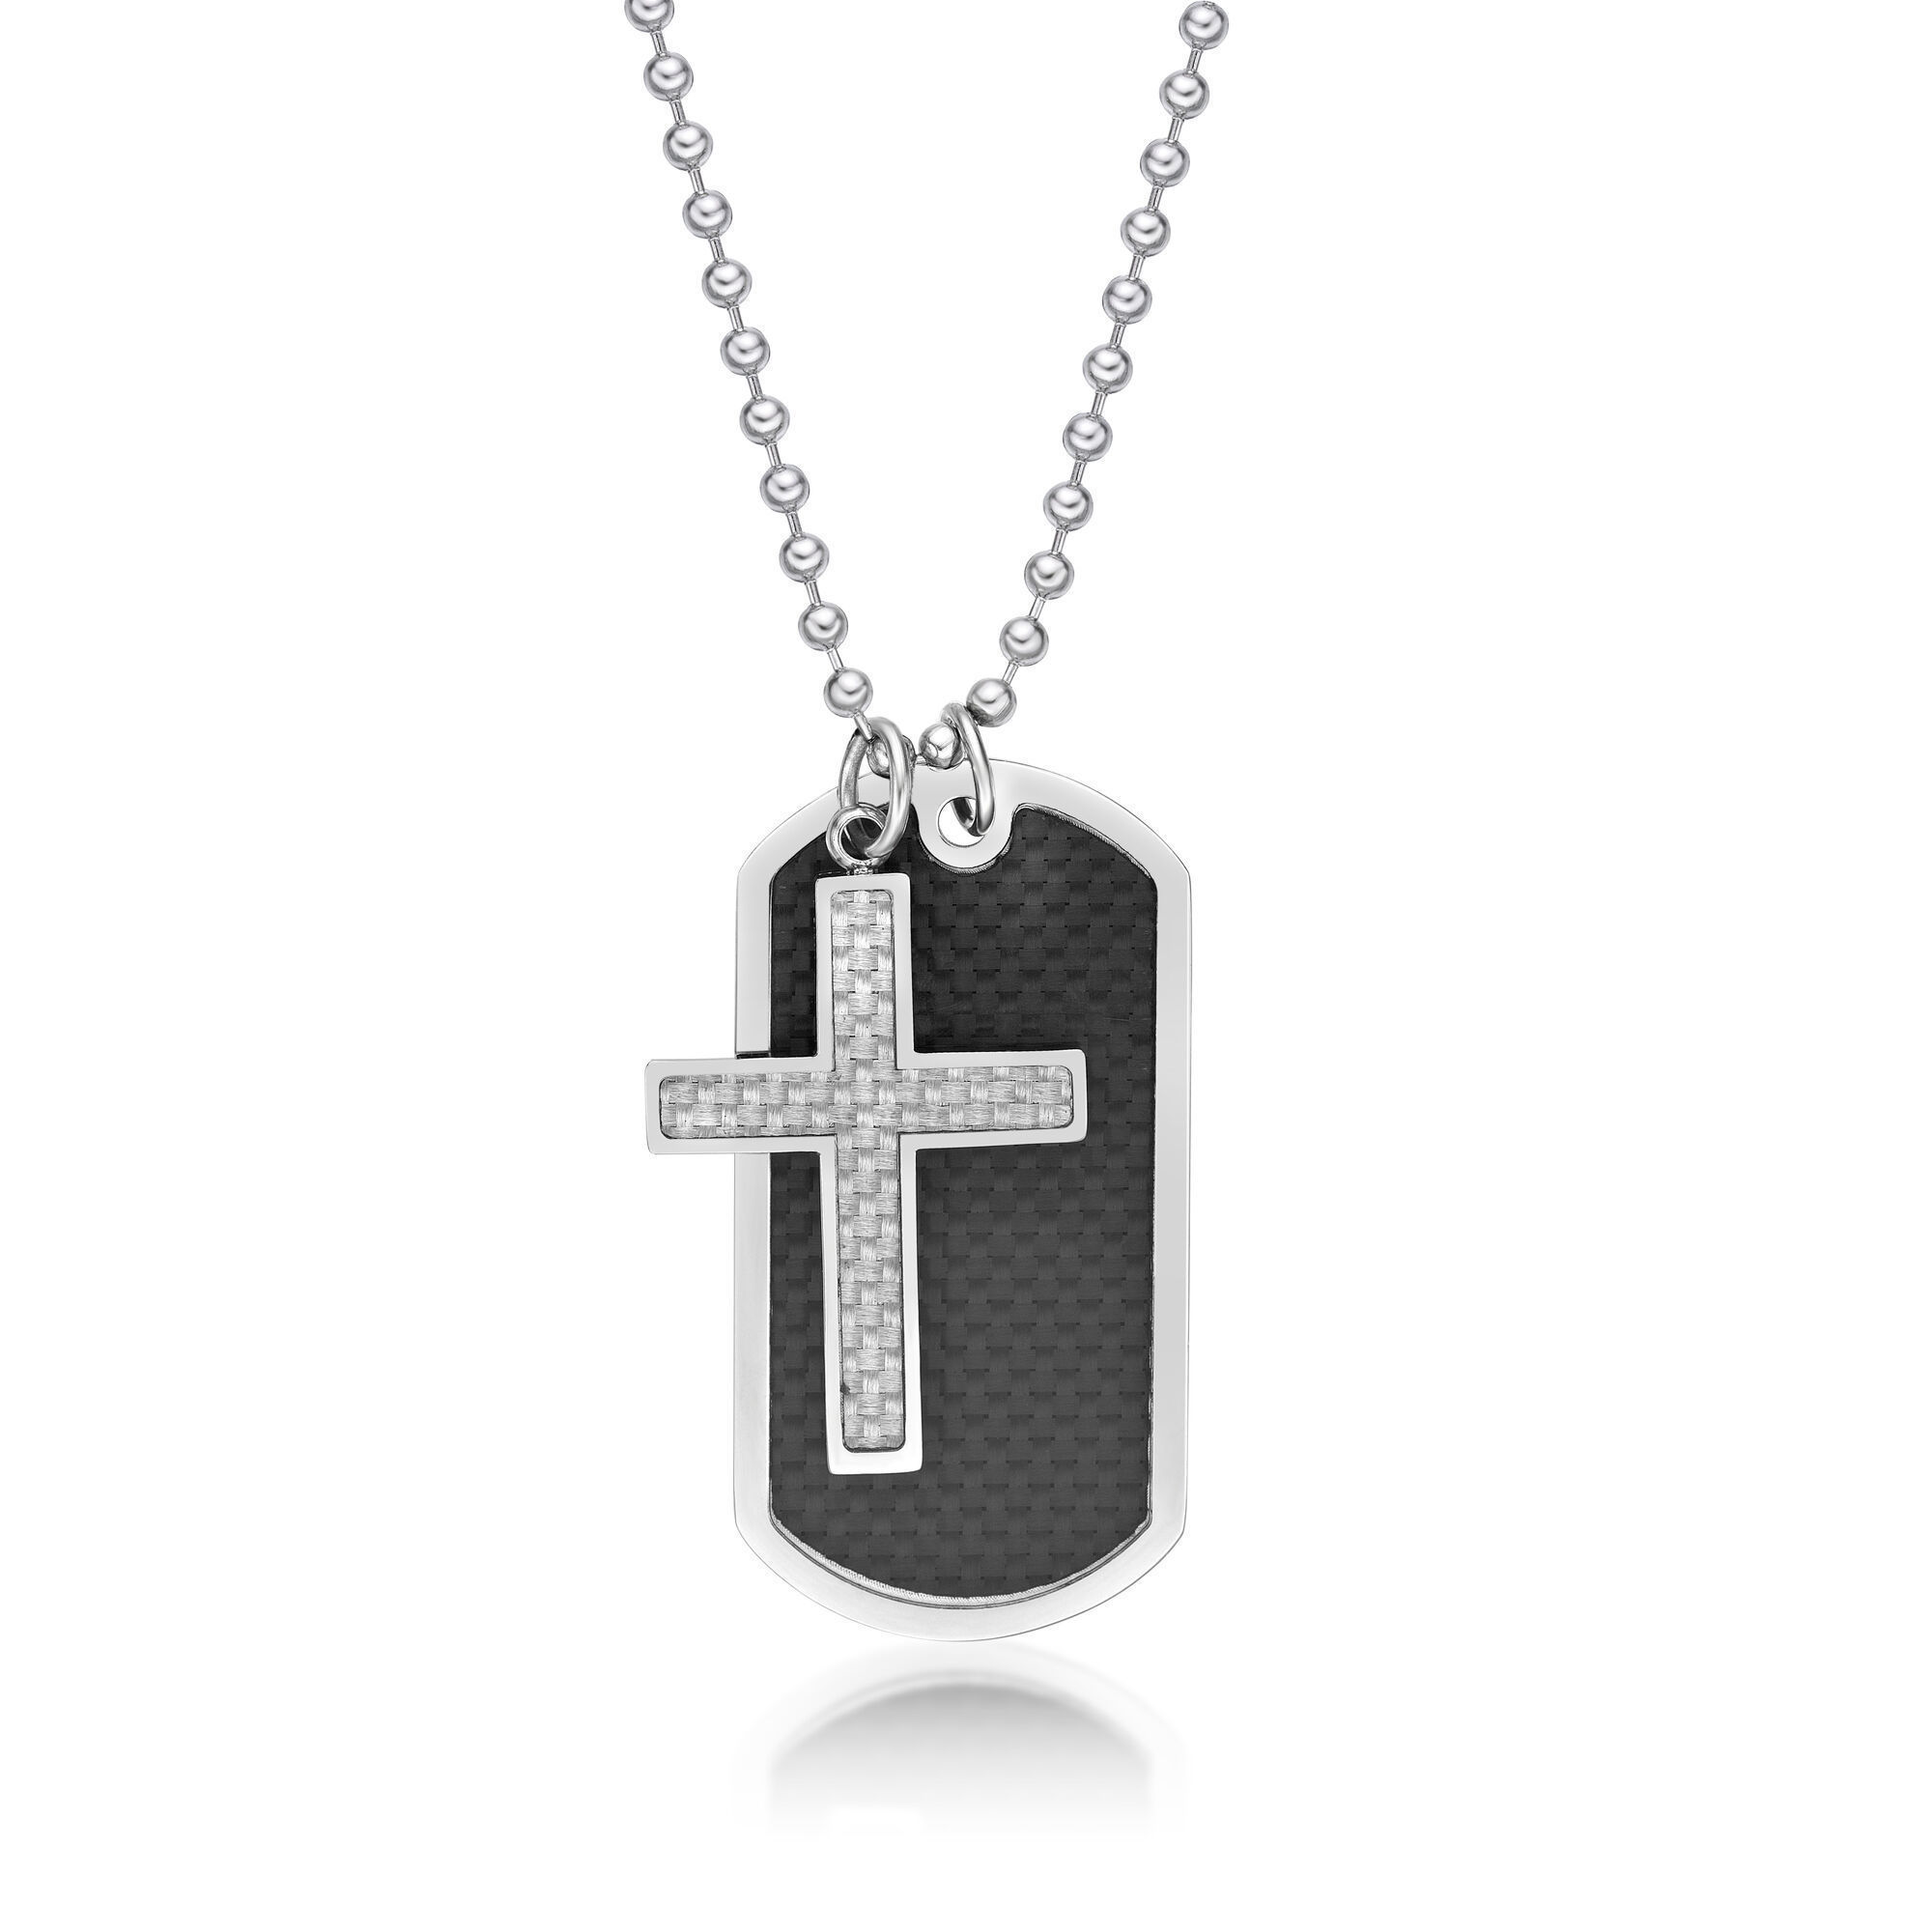 Stainless Steel Carbon Fiber Cross Dog Tag Pendant - 24 Inch Ball Chain | Metro Jewelry